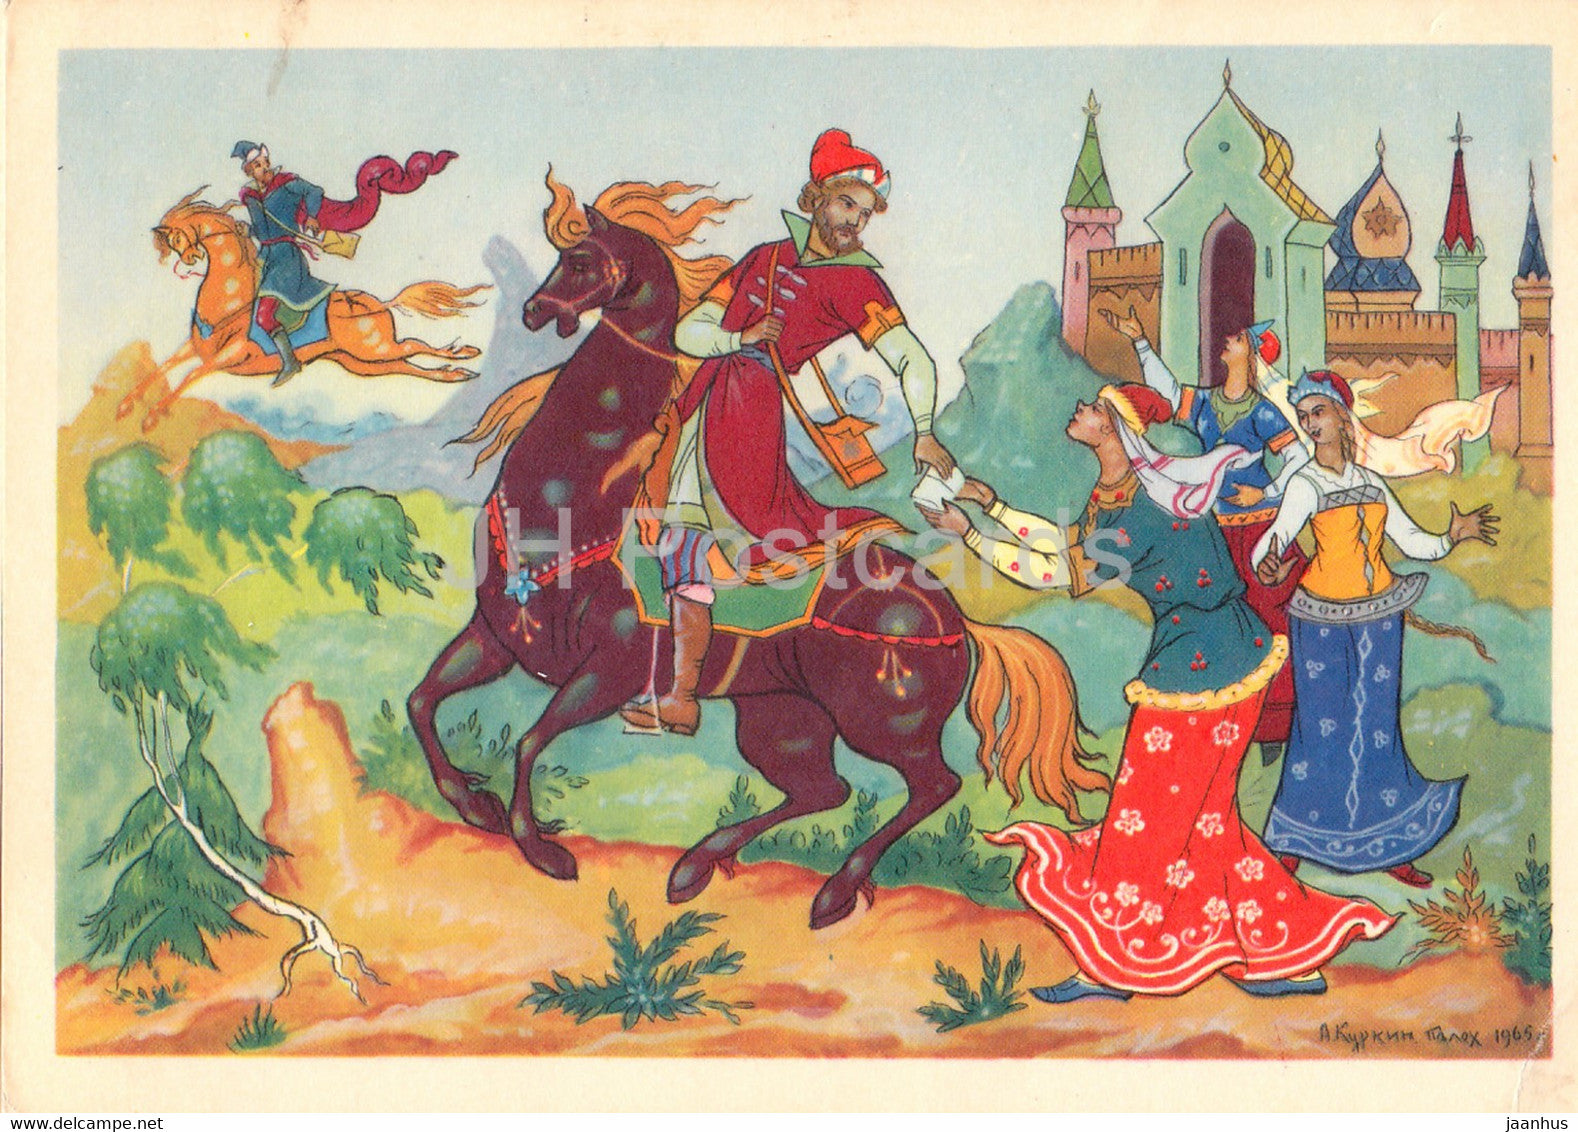 The Tale of Tsar Saltan by A. Pushkin - horse - Fairy Tale - 1966 - Russia USSR - unused - JH Postcards